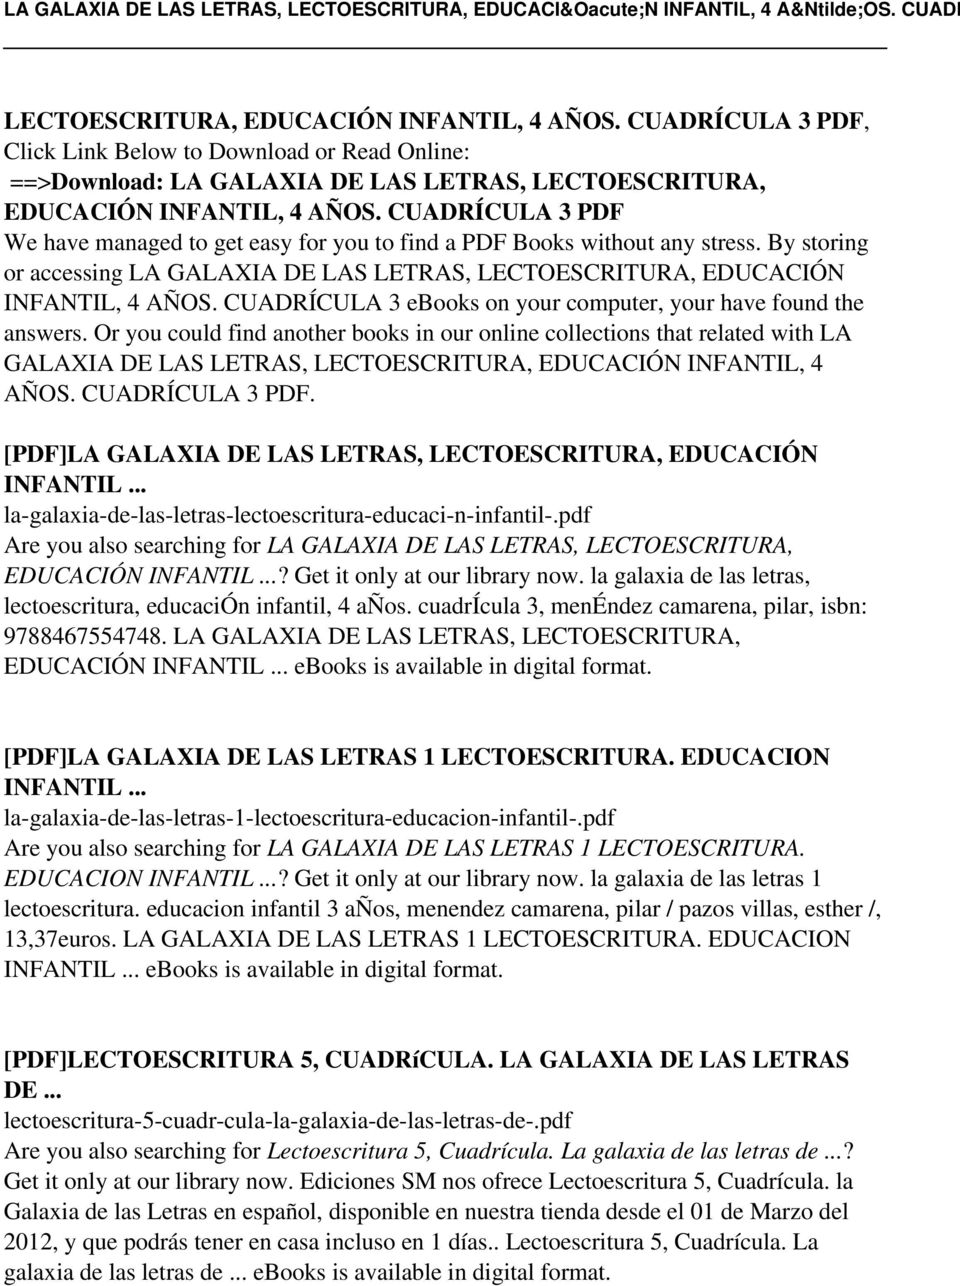 CUADRÍCULA 3 ebooks on your computer, your have found the answers.